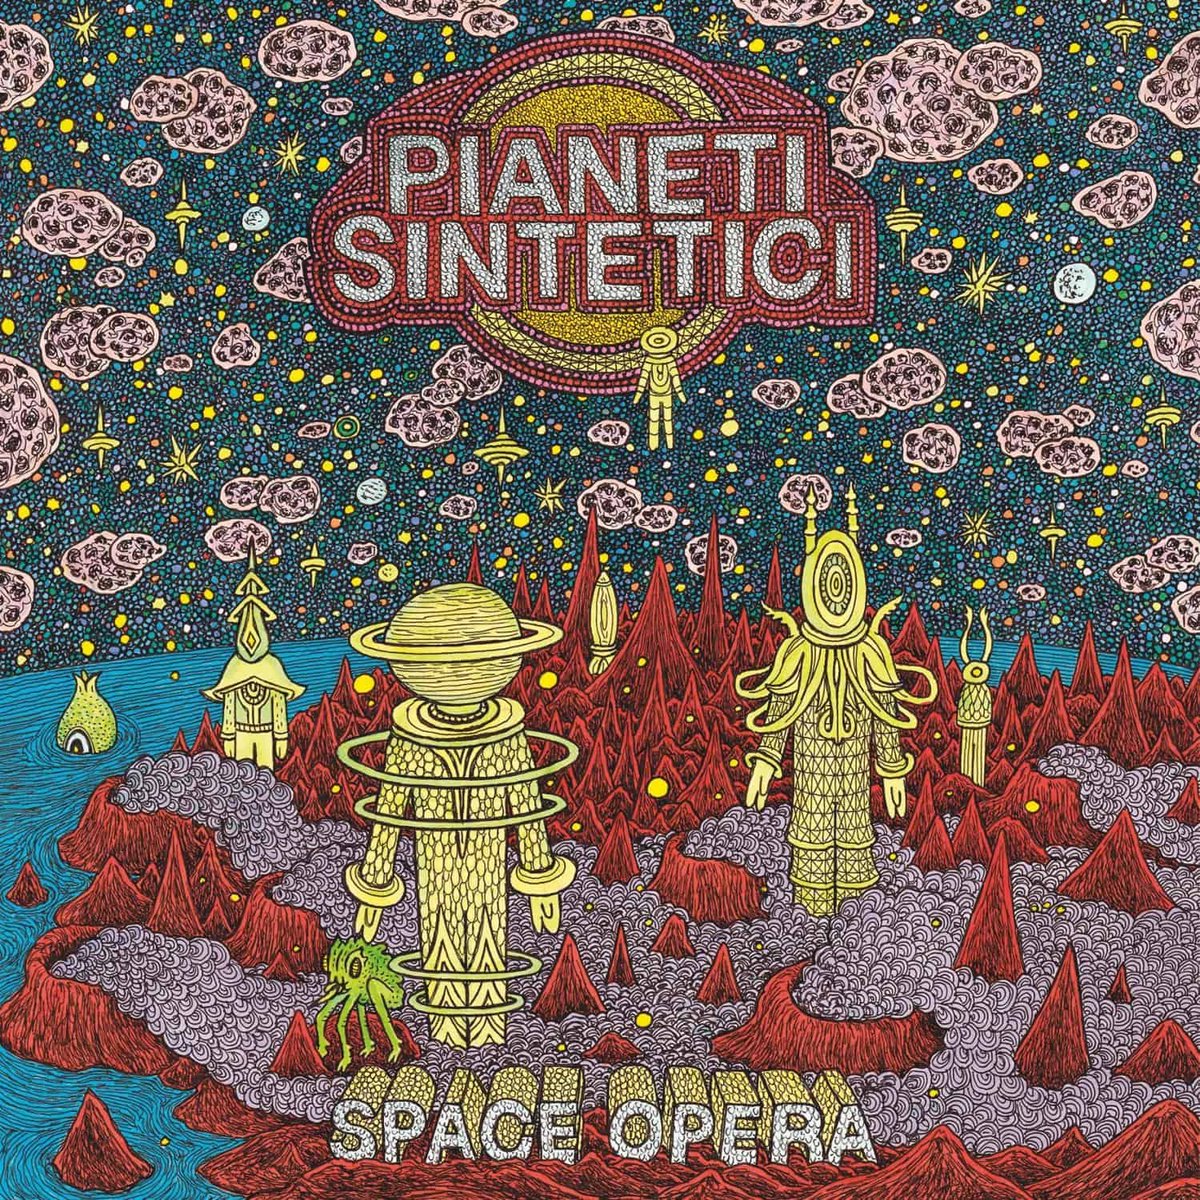 PRE-ORDER: 'Space Opera' by Pianeti Sintetici Milan electronic producer and one half of Primal Code Davide Perrone announces his debut album on Astral Industries, blending modular synthesisers with deep and dense sound design. normanrecords.com/records/203277…